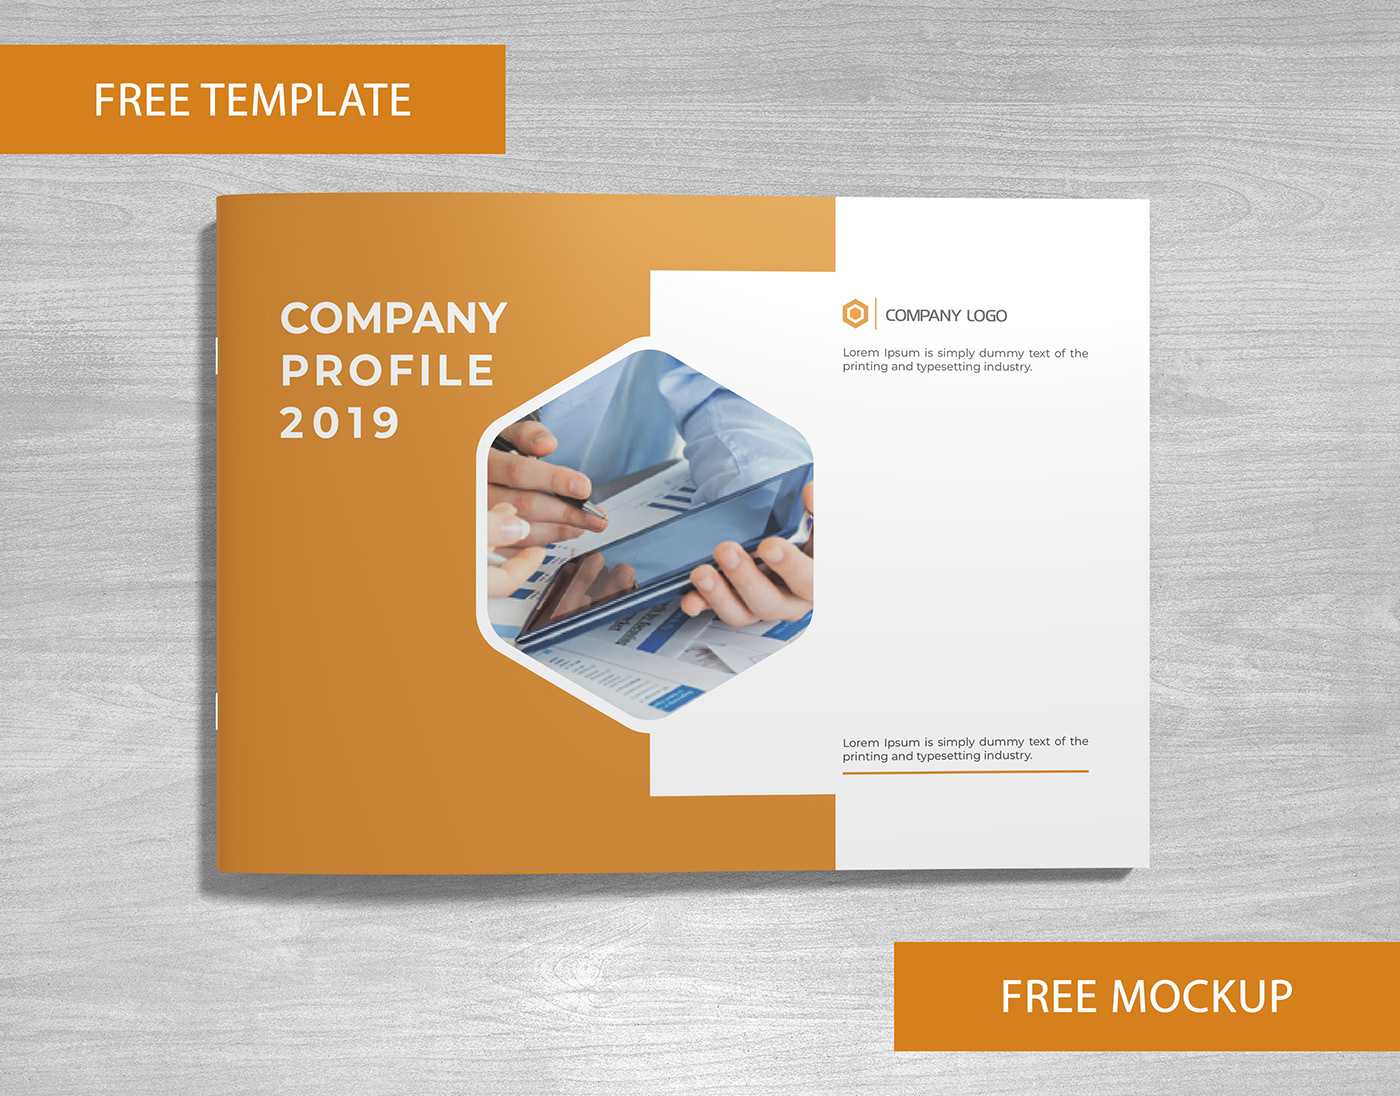 Company Profile Free Template And Mockup Download On Behance Within Creative Brochure Templates Free Download